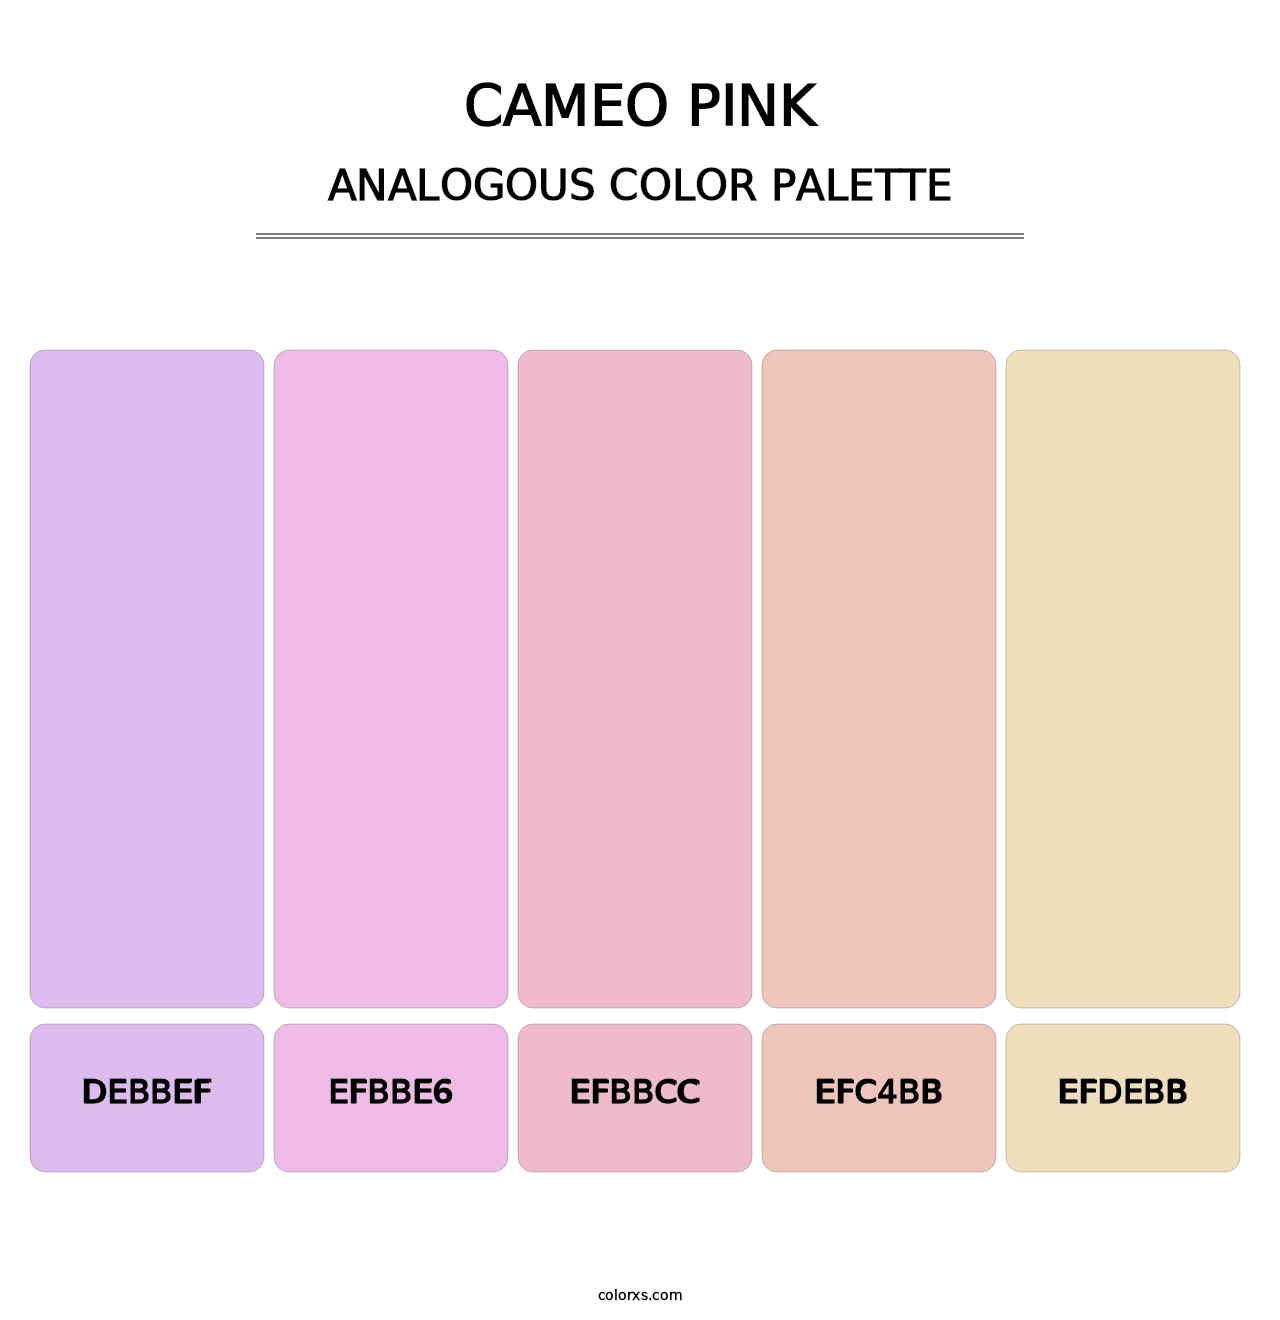 Cameo Pink - Analogous Color Palette